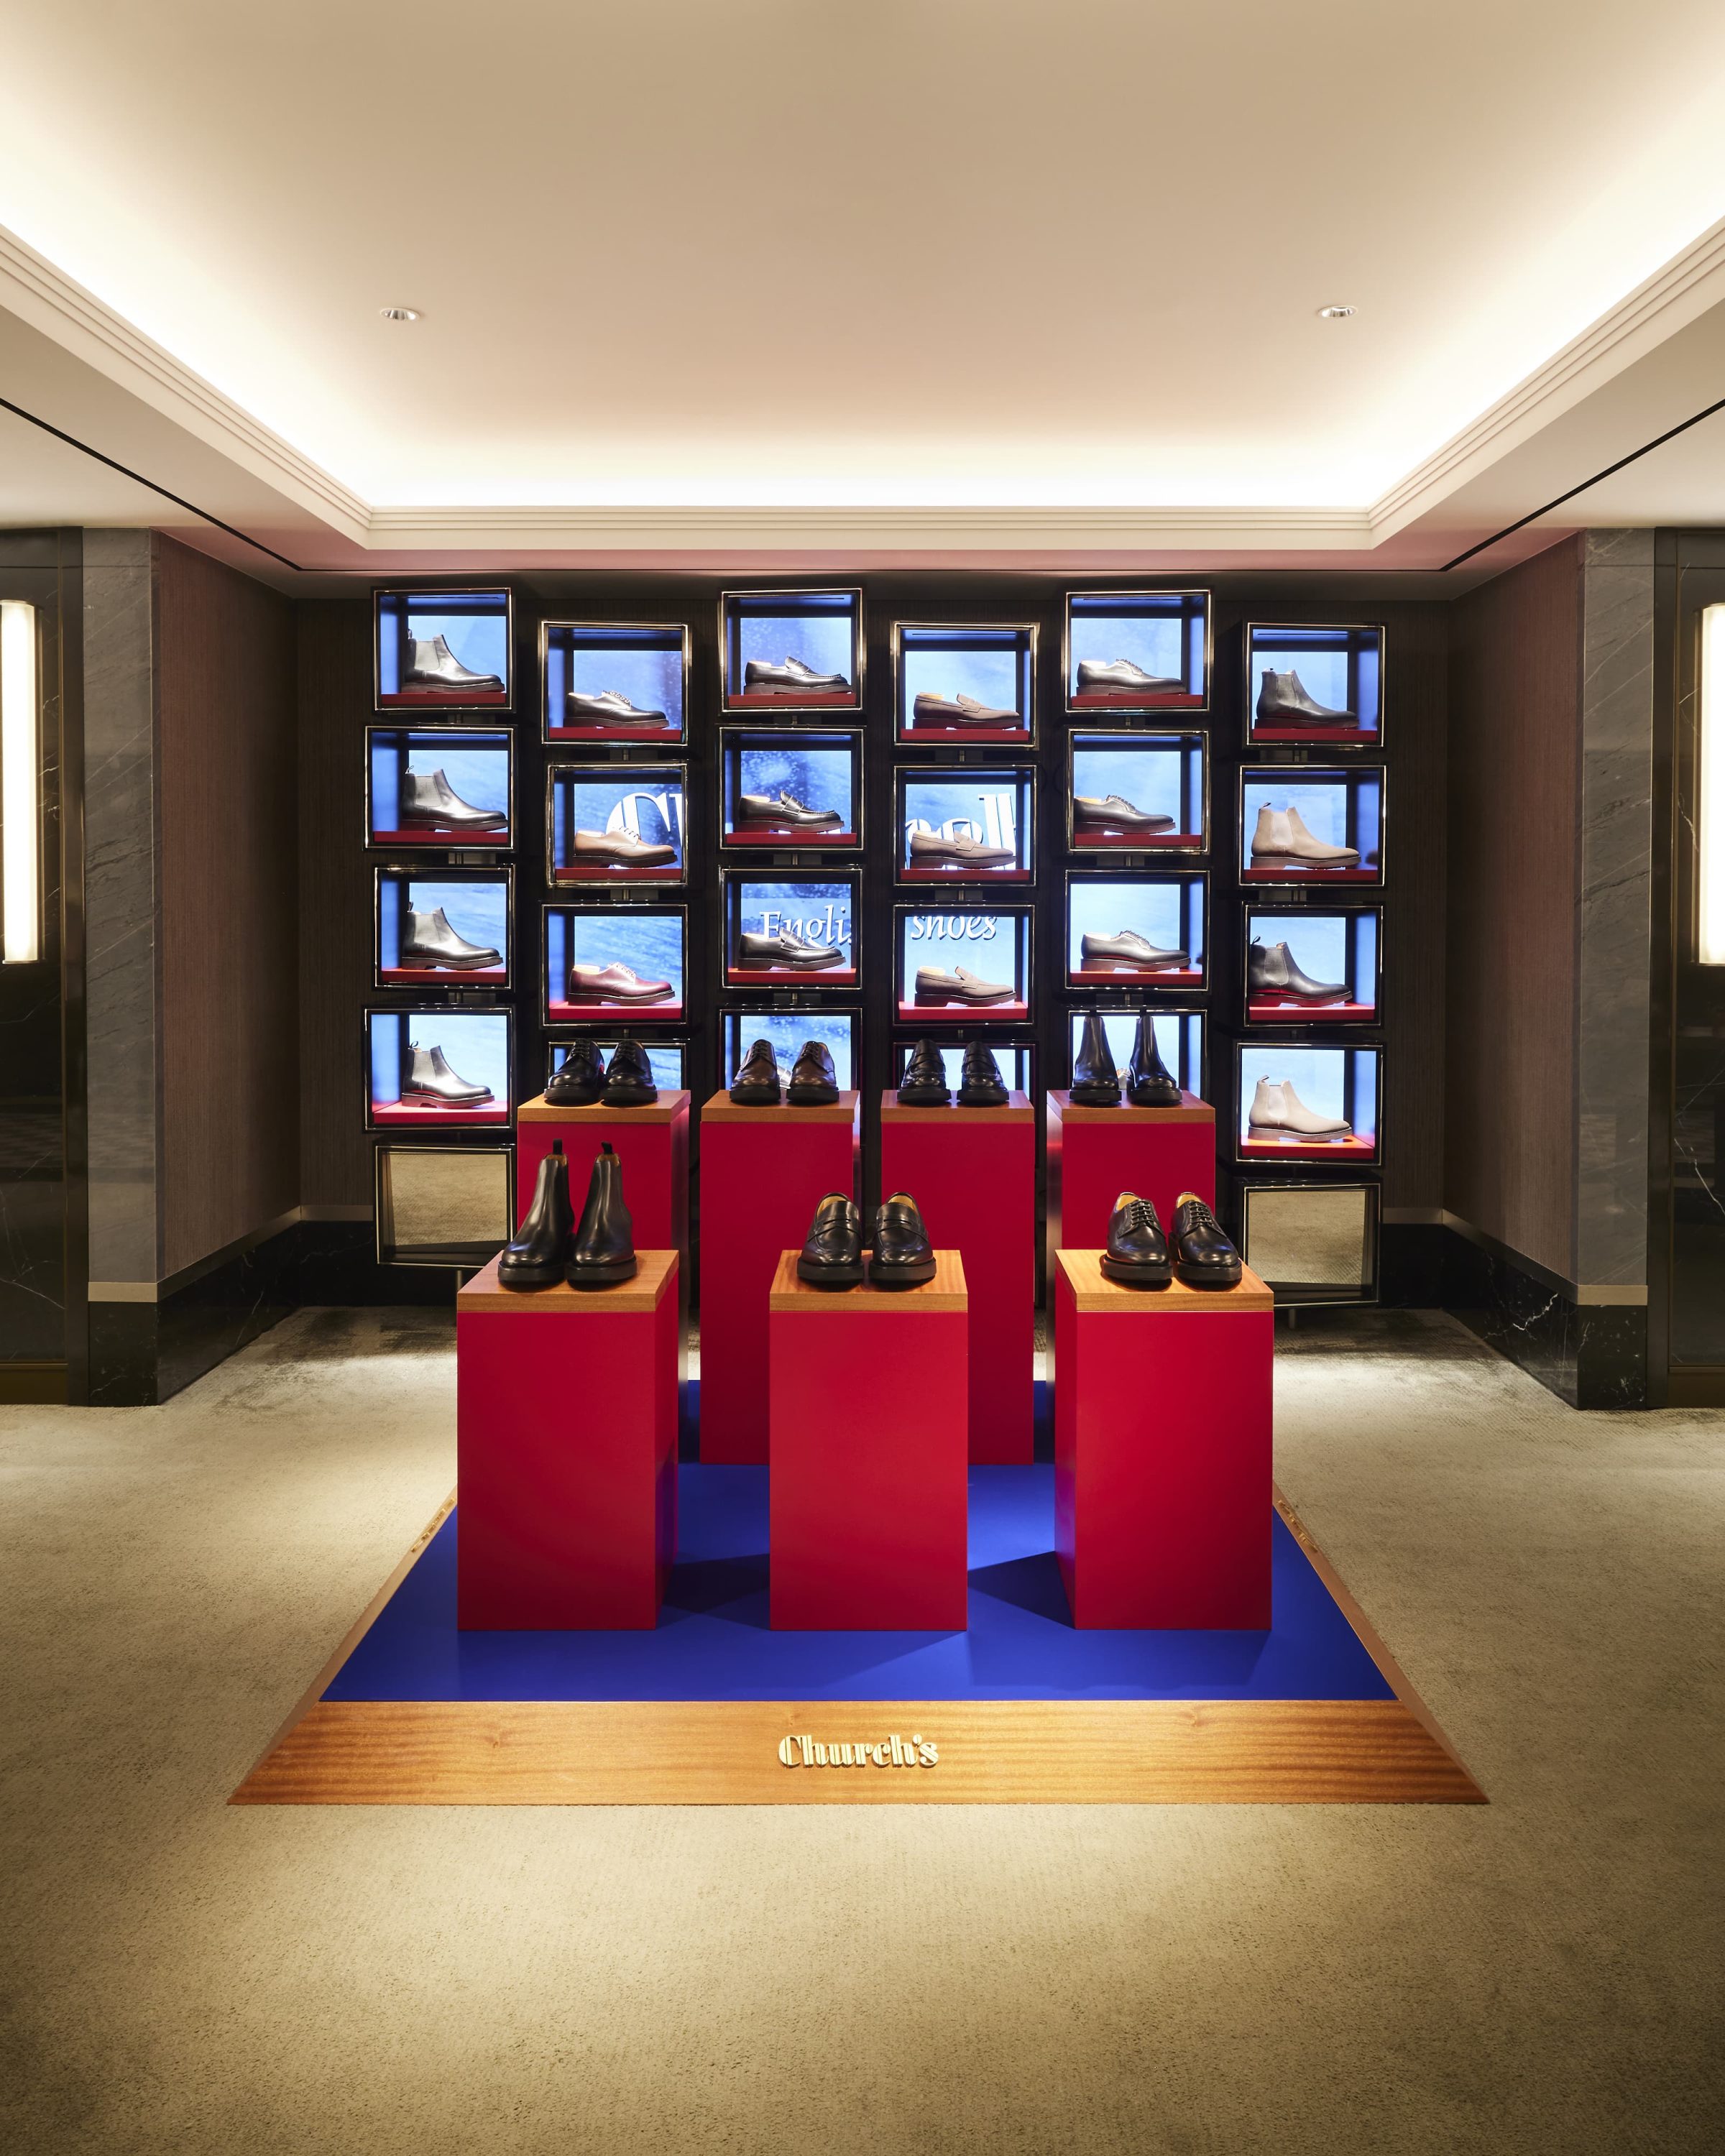 Church's inaugurates a temporary space in Harrods, the historic luxury department store in the English capital.